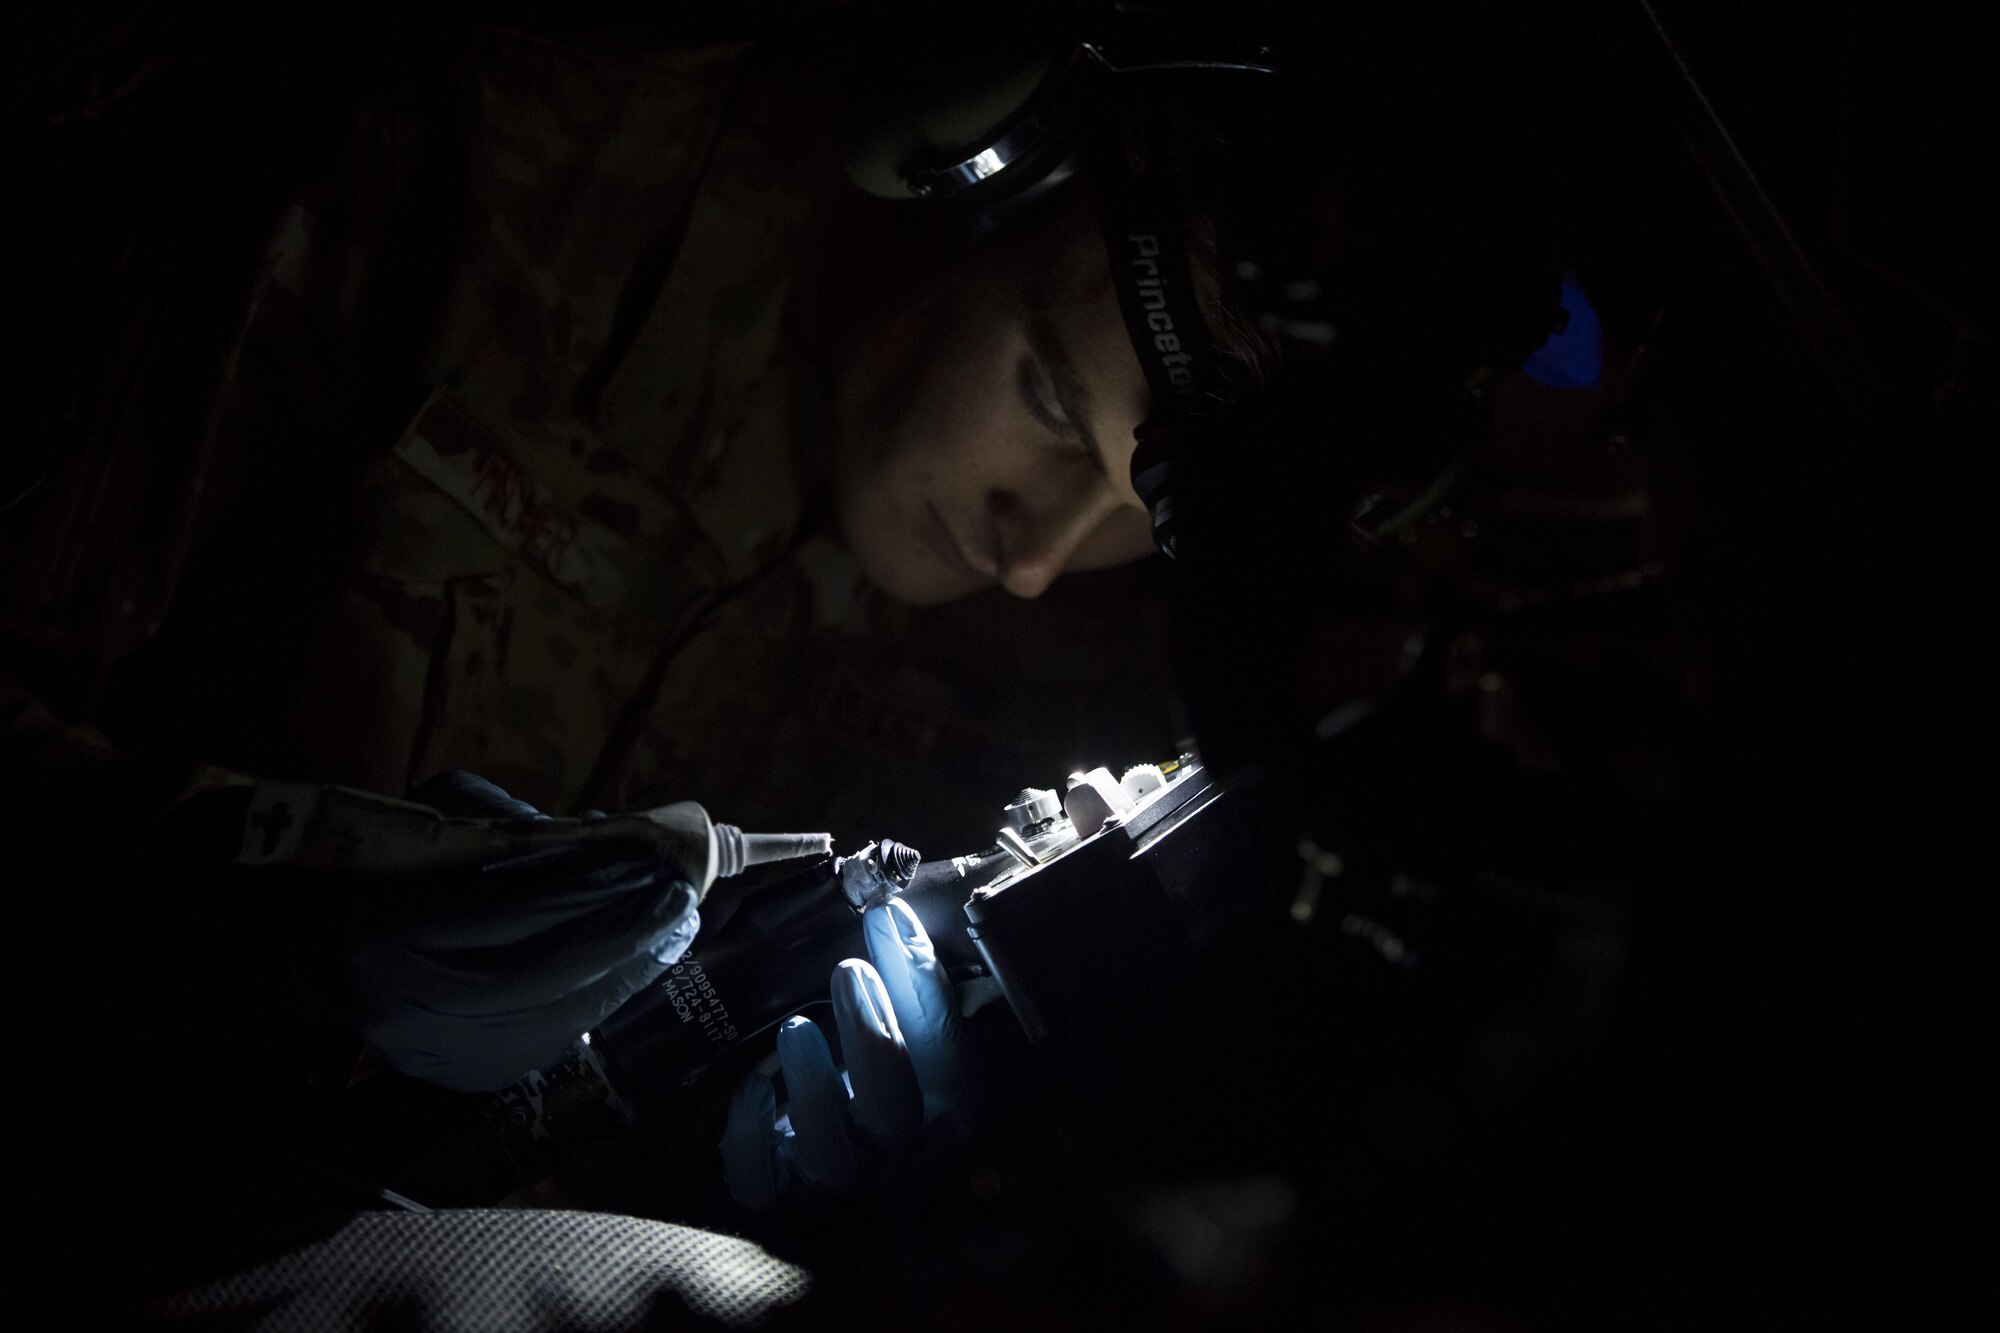 An Airman from the 41st Helicopter Maintenance Unit performs maintenance on an HH-60G Pave Hawk, Jan. 22, 2018, at Moody Air Force Base, Ga. The 41st RQS is responsible for maintaining combat-ready personnel for recovery missions. To achieve this, members of the squadron constantly train on day and nighttime operations to maintain proficiency. (U.S. Air Force photo by Senior Airman Janiqua P. Robinson)